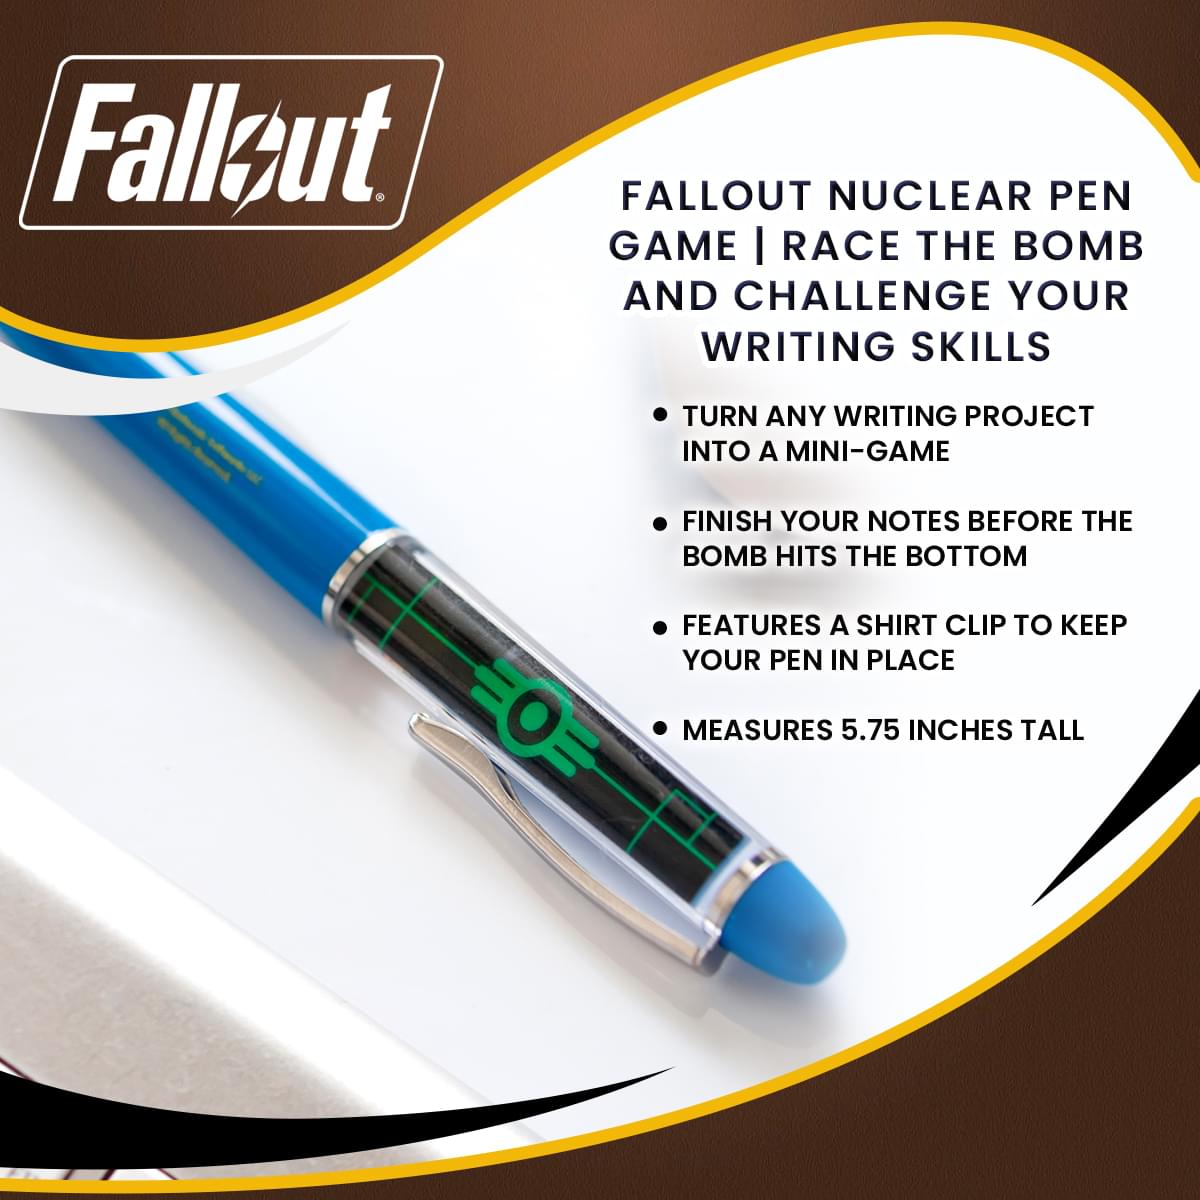 Fallout Nuclear Pen Game | Race The Bomb And Challenge Your Writing Skills